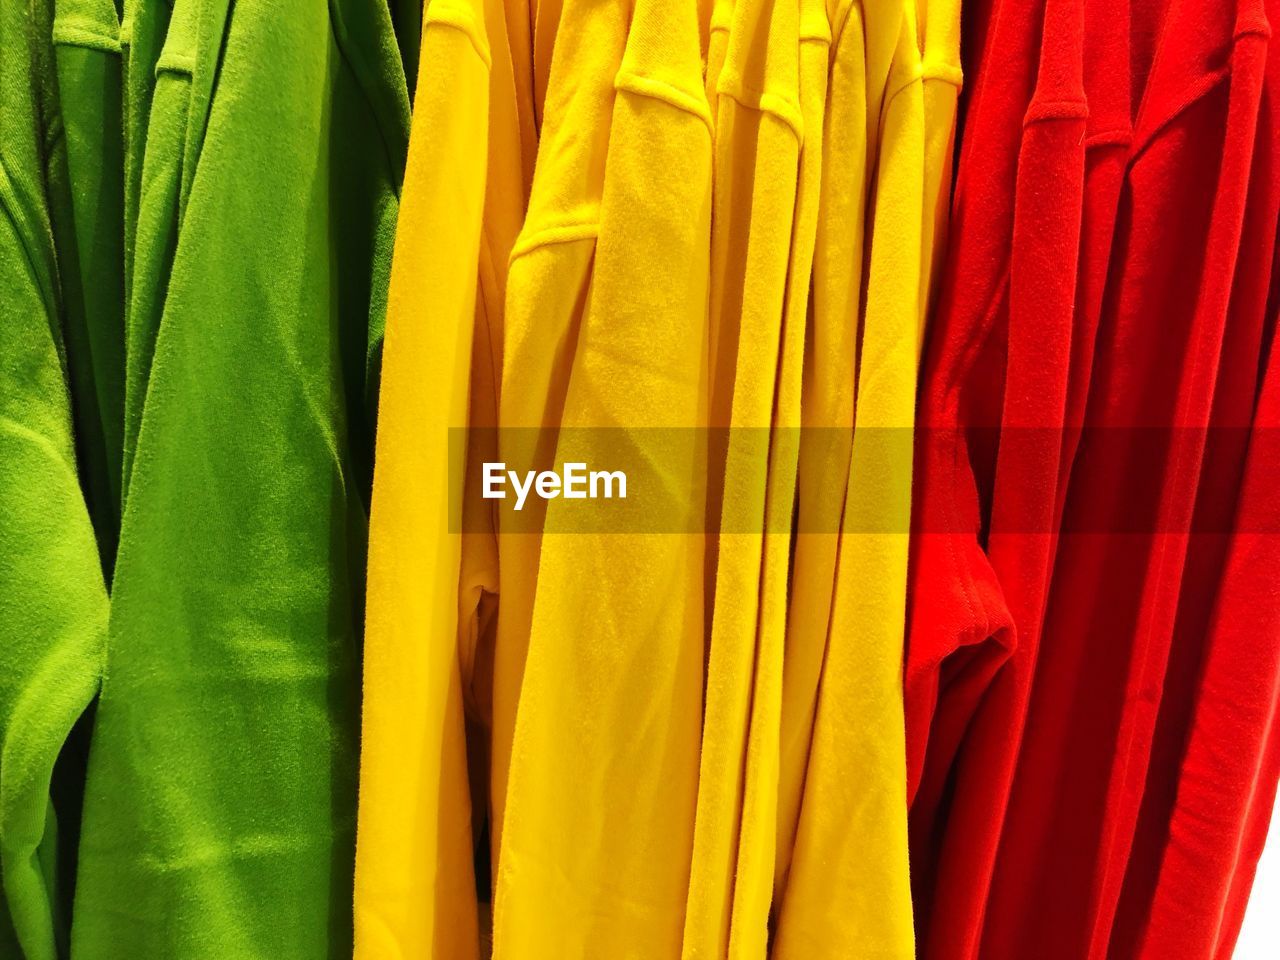 Full frame shot of colorful clothes for sale